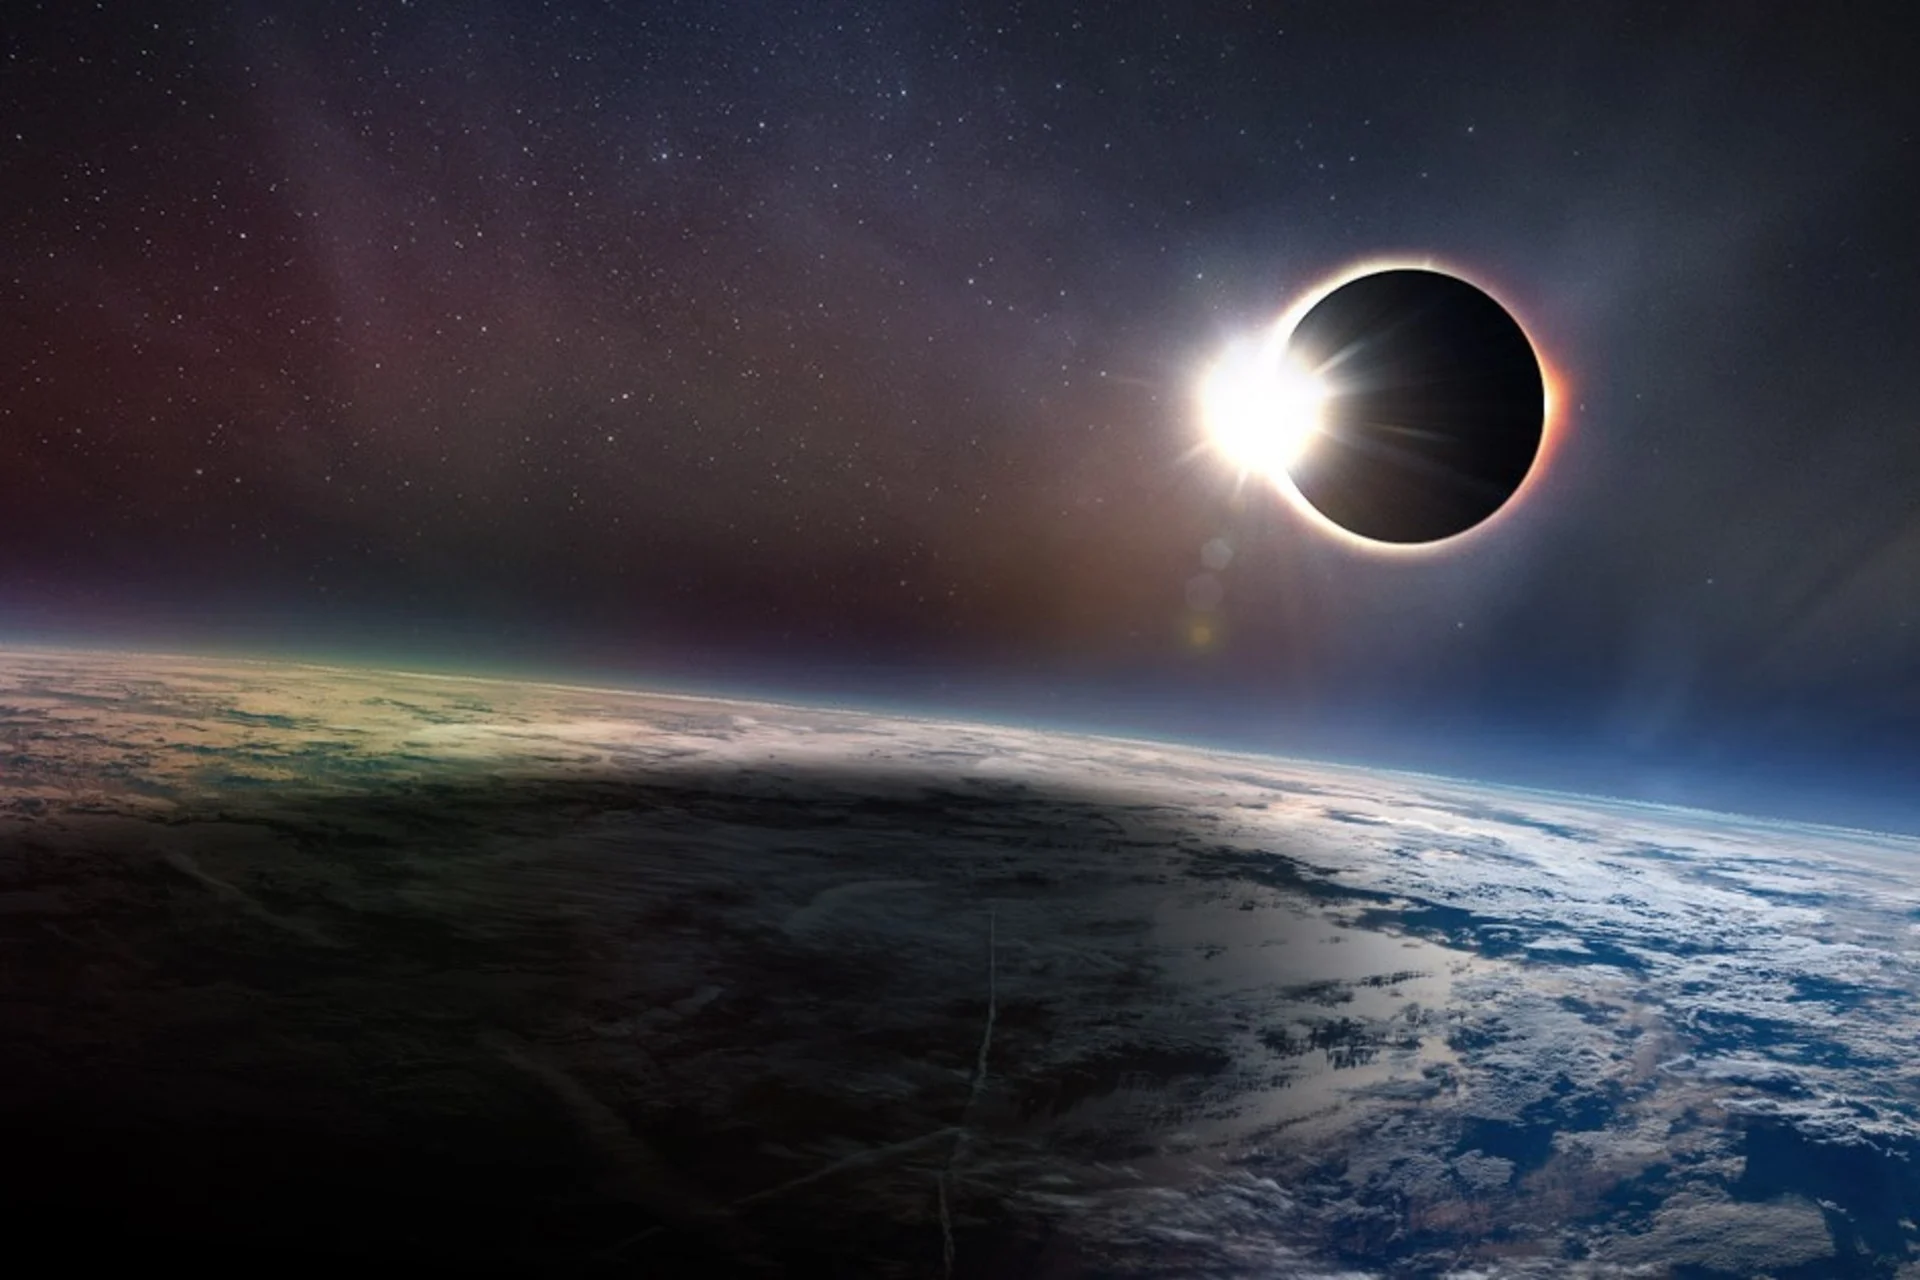 Eclipse-Agence spatiale canadienne